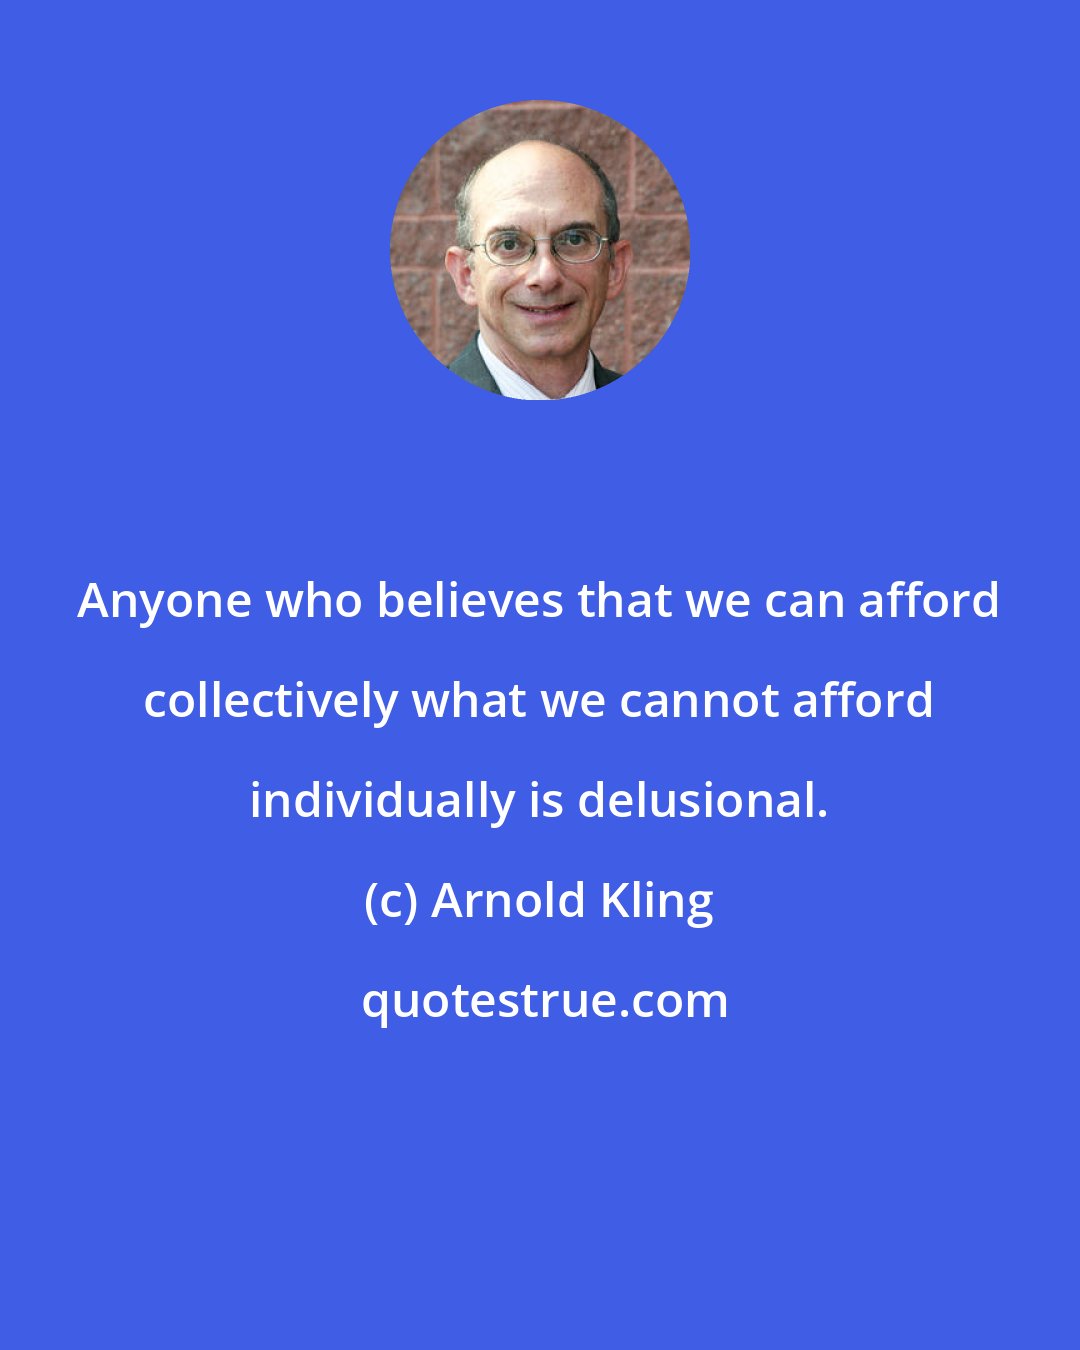 Arnold Kling: Anyone who believes that we can afford collectively what we cannot afford individually is delusional.